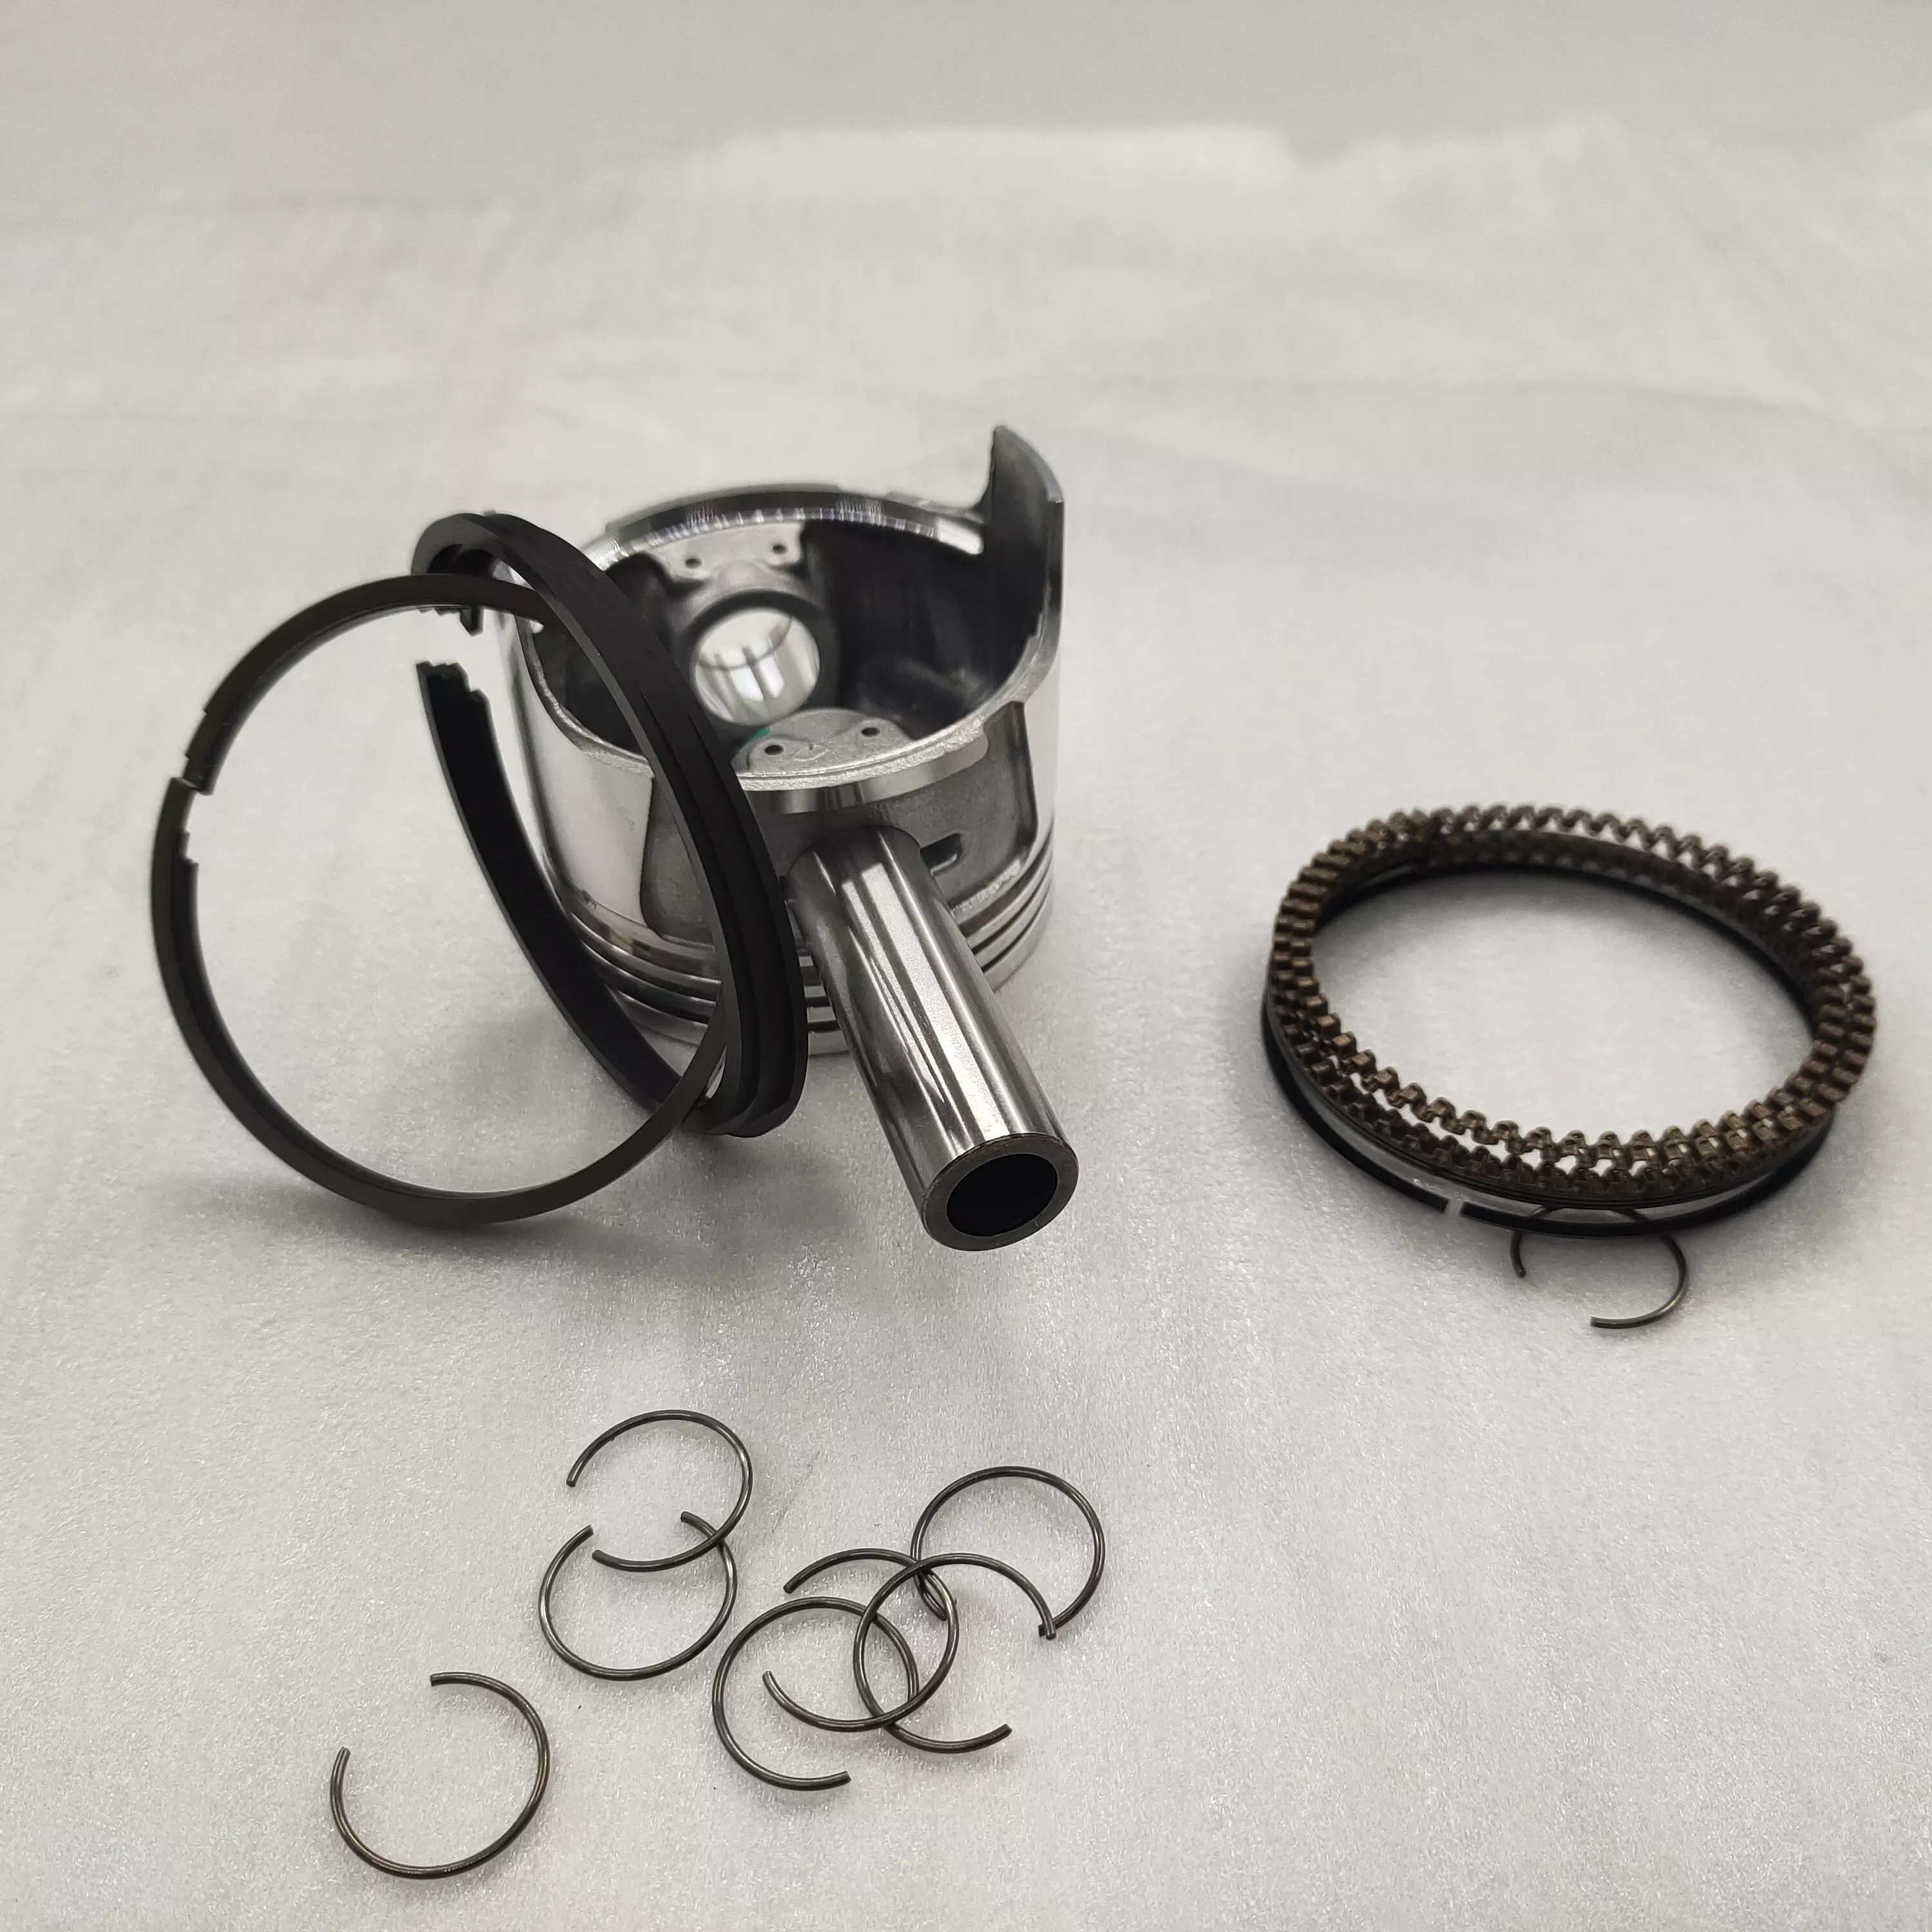 Dayang Tricycle Parts High-quality 800cc Engine Parts Piston Assembly Piston Pin Piston Ring Circlip